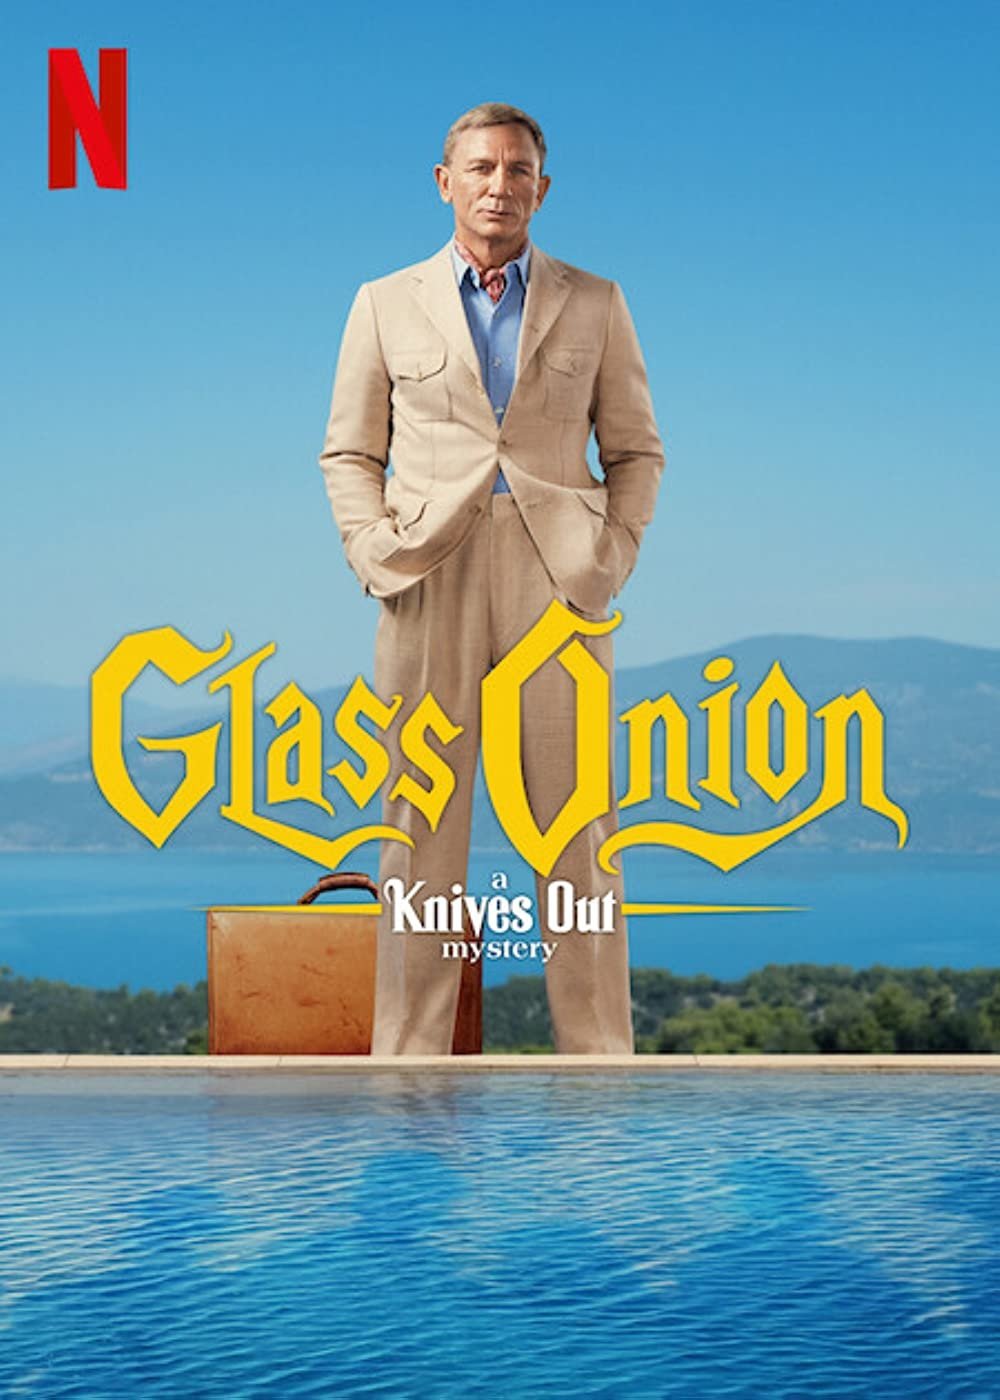 Glass Onion: A Knives Out Mystery Movie